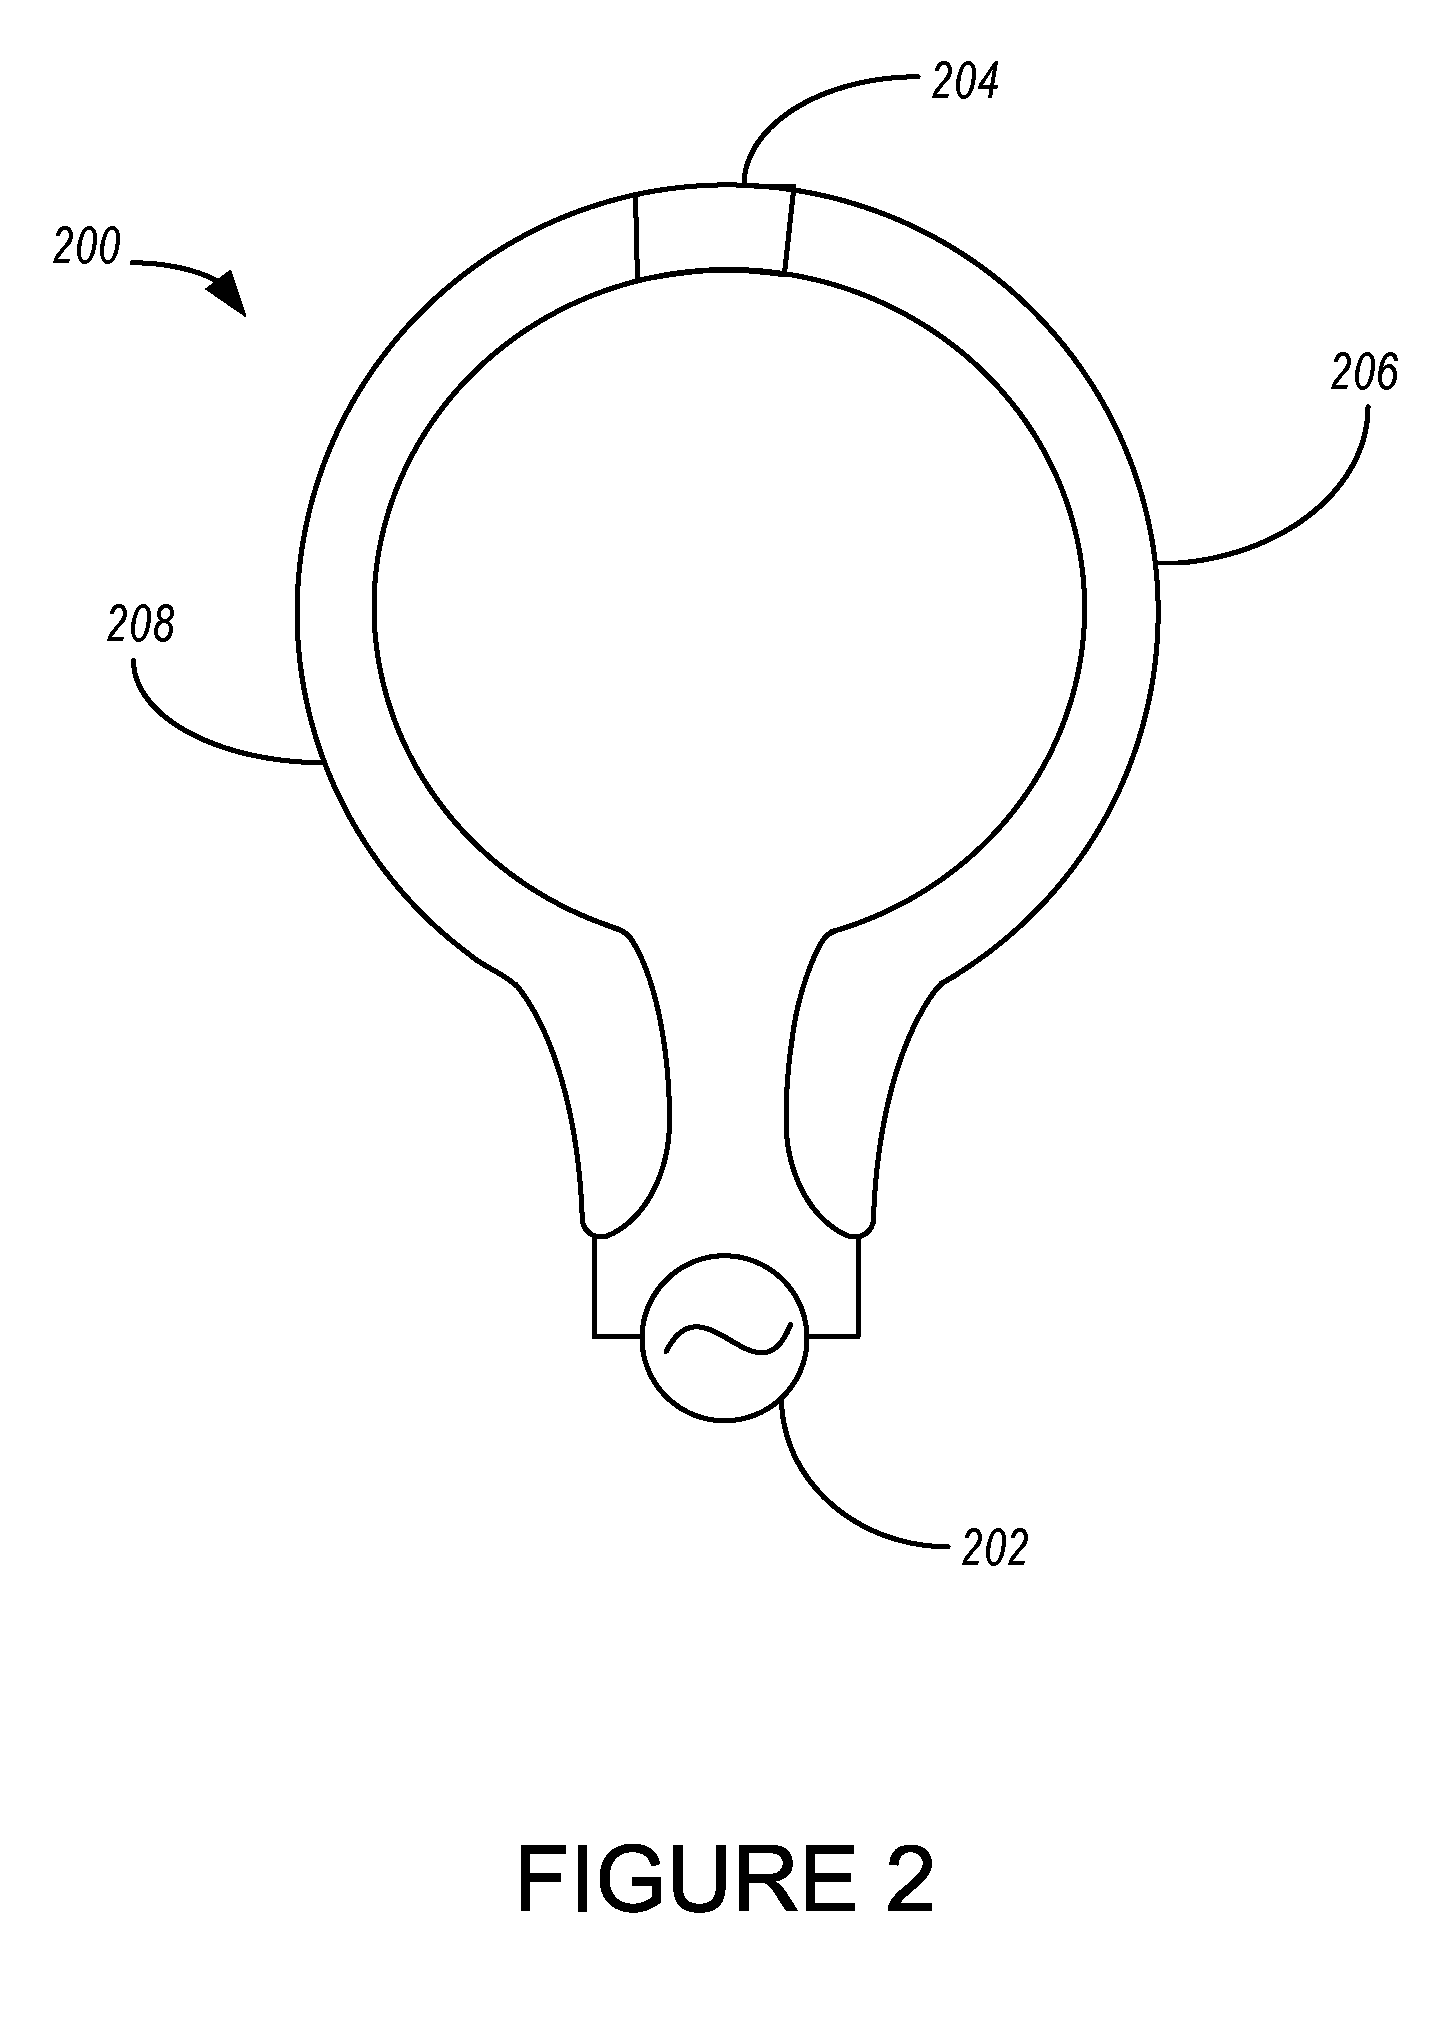 Physiological data acquisition and management system for use with an implanted wireless sensor